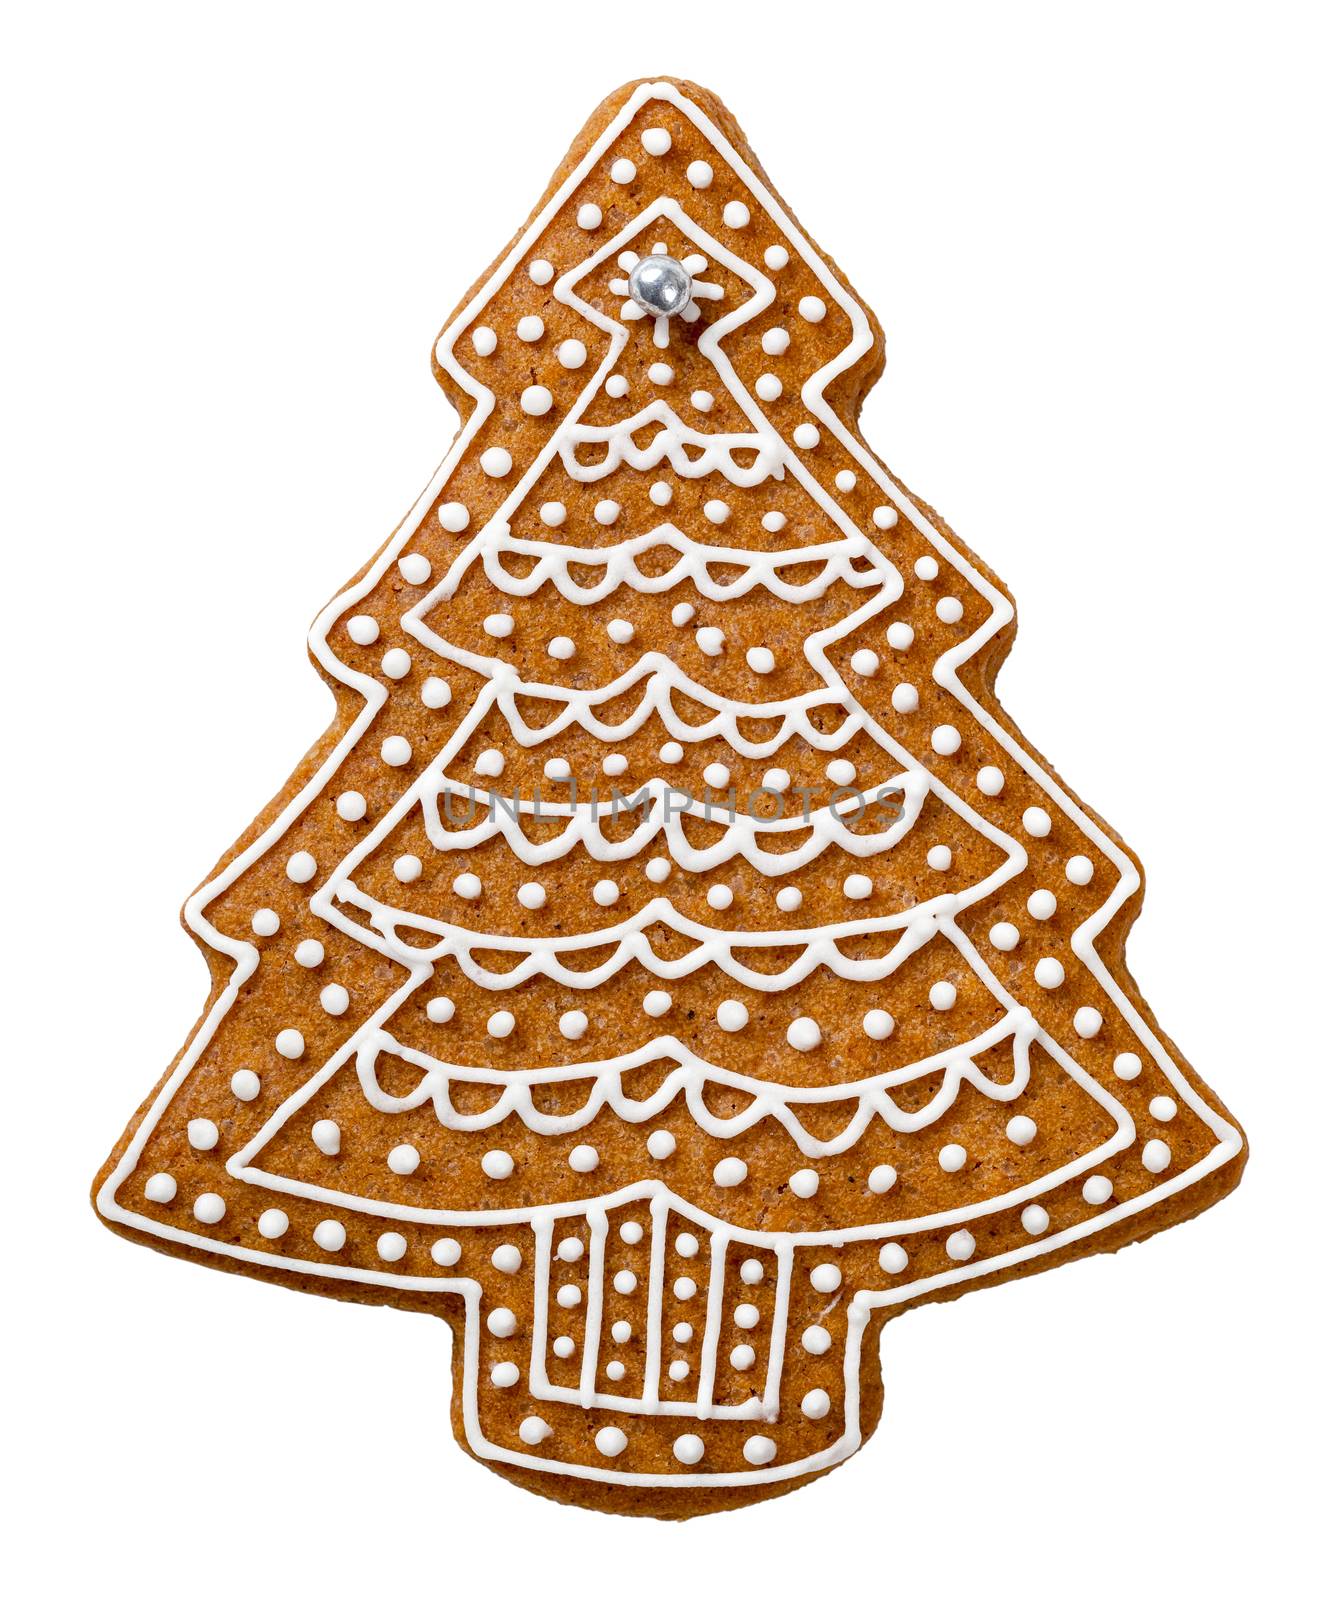 Gingerbread cookie in shape of tree for Christmas isolated on white background